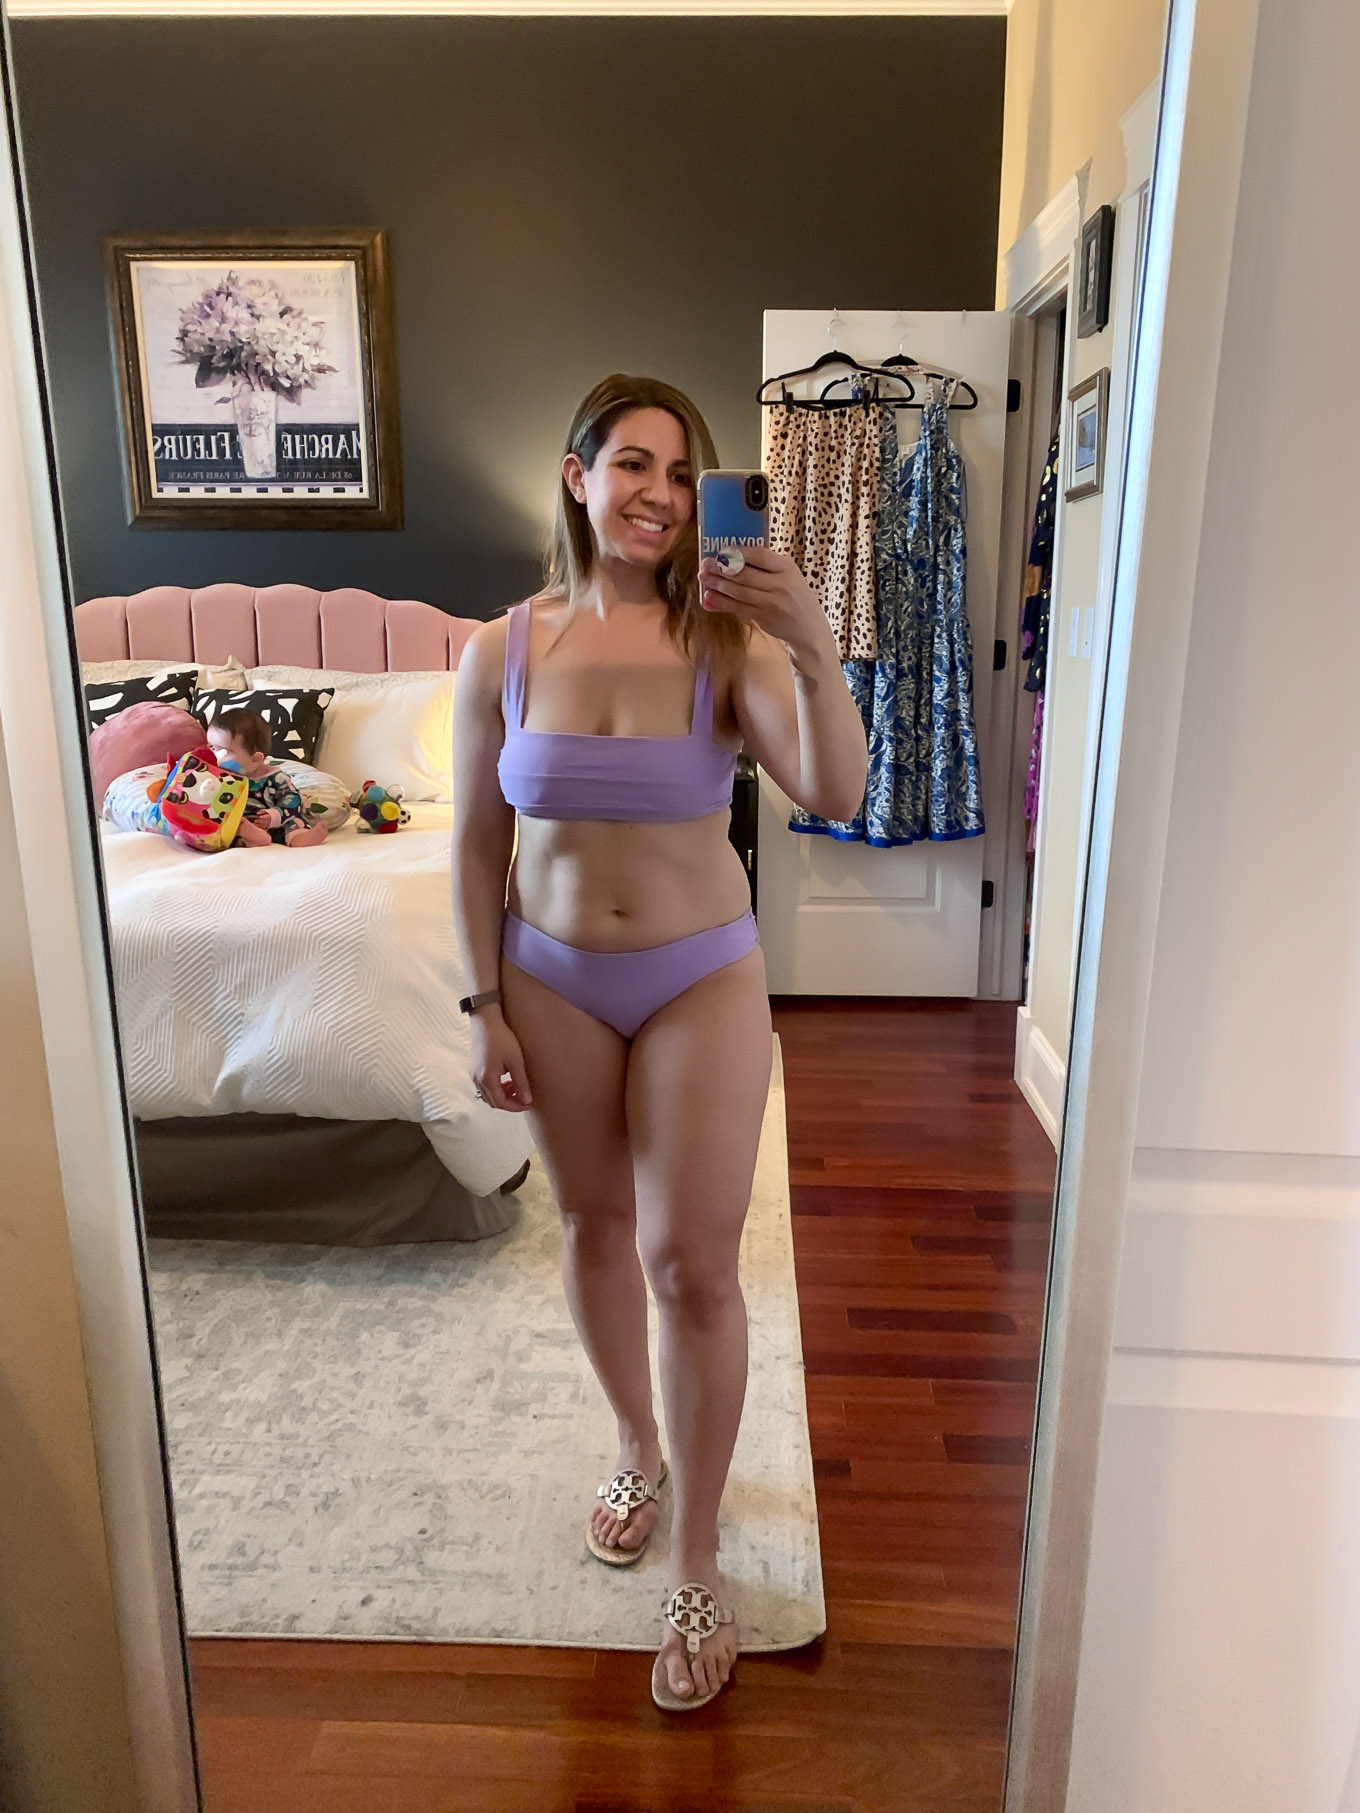 At Home Swimwear Try On by popular Chicago fashion blog, Glass of Glam: image of a woman standing in her master bedroom and wearing a light purple bikini. 